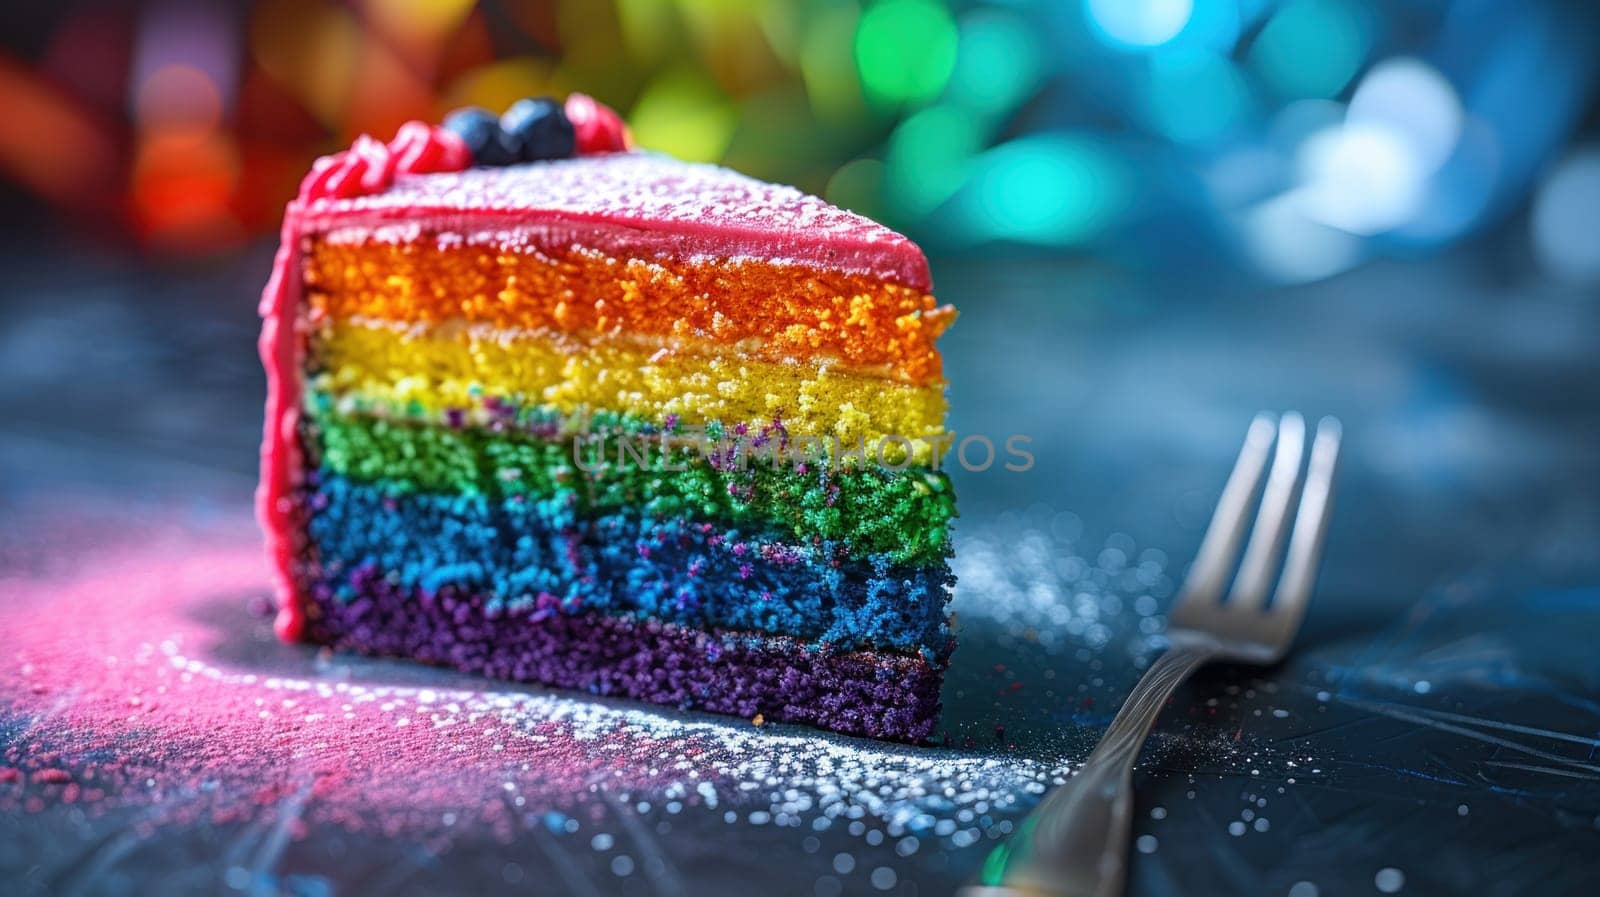 A slice of rainbow pride cake with pink frosting and sprinkles on a plate.